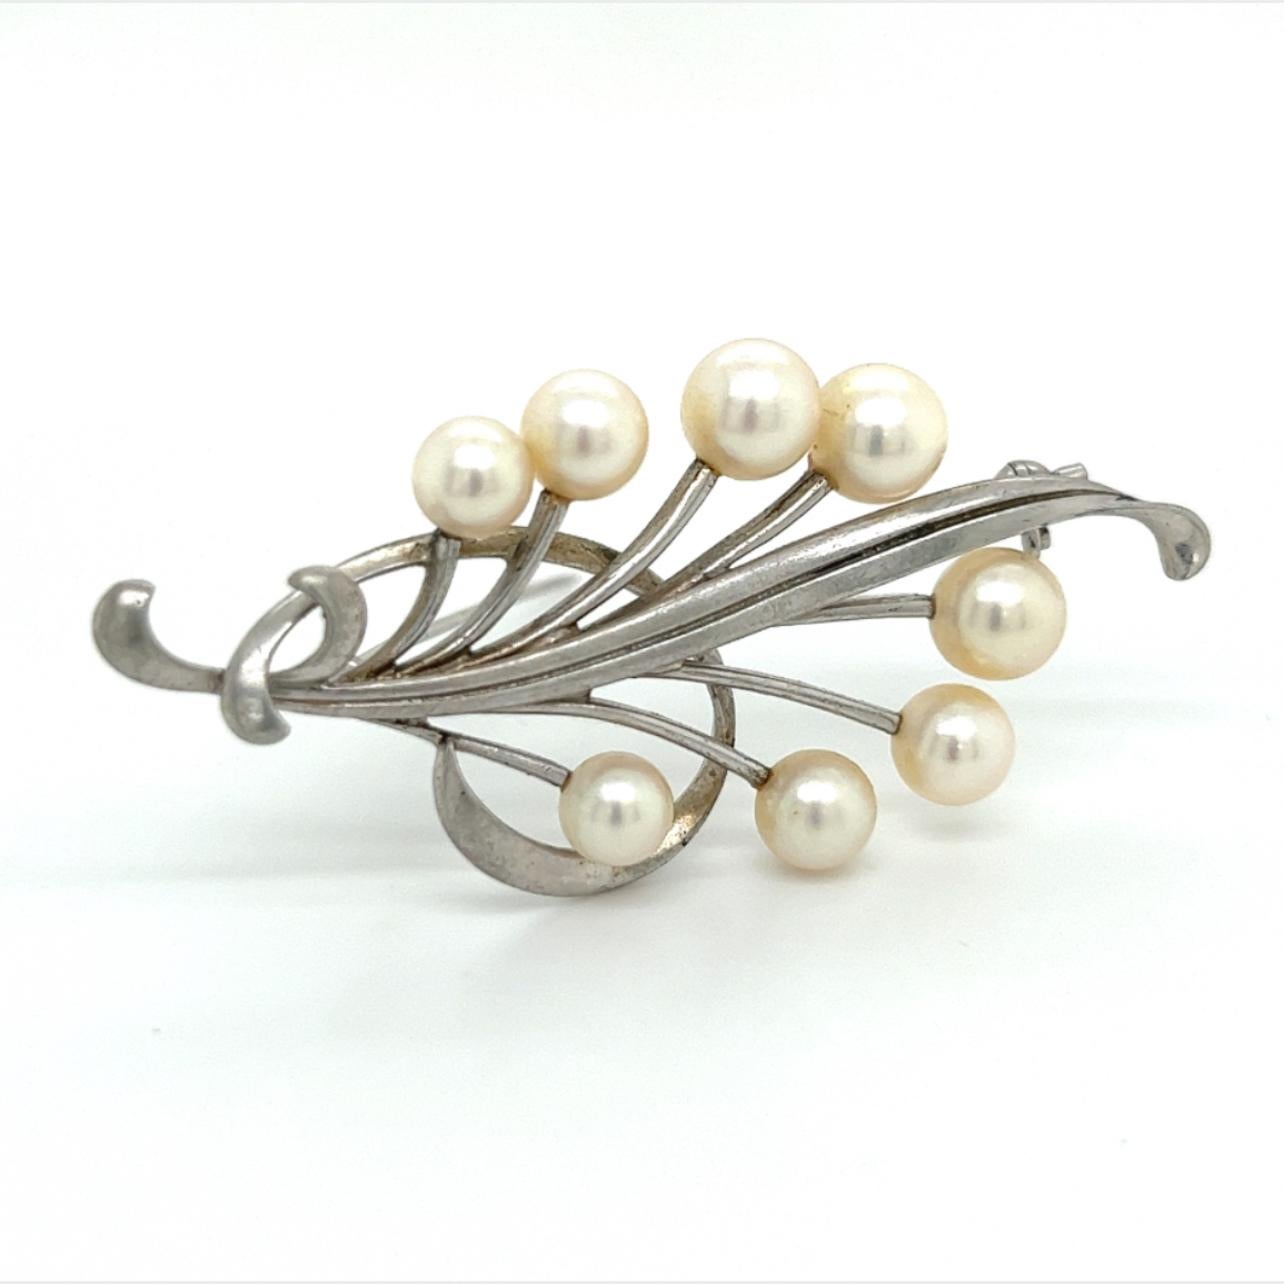 Mikimoto Estate Akoya Pearl Brooch Pin Sterling Silver 7.10 mm M277

This elegant Authentic Mikimoto Estate sterling silver brooch has 8 Saltwater Akoya Cultured Pearls ranging in size from 5.60 - 7.10 mm with a weight of 8.63 Grams.

TRUSTED SELLER